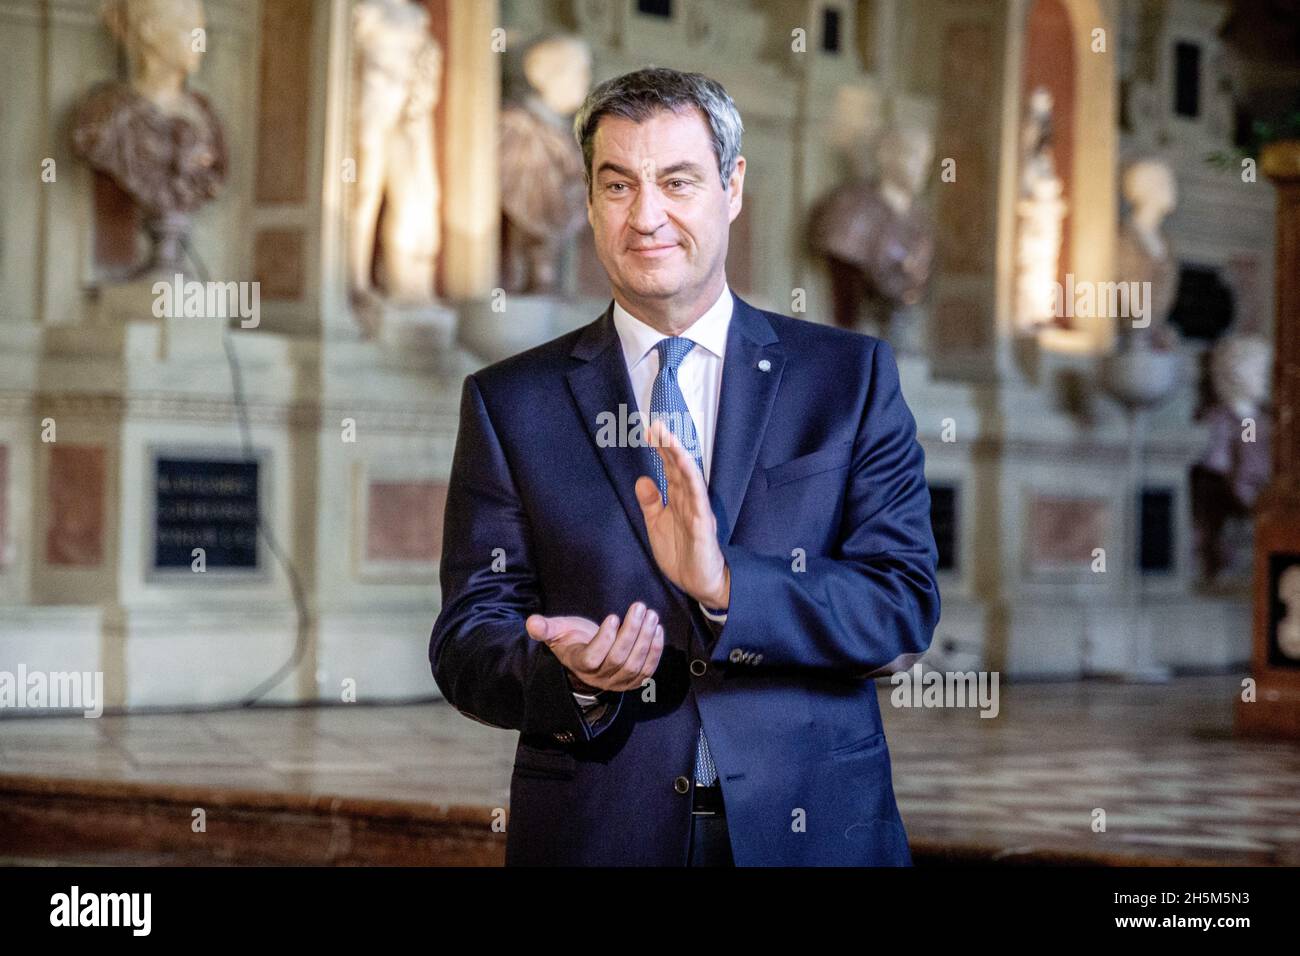 Markus Söder clapping.On November 10, 2021 in Munchen, Germany. The Bavarian Prime Minister Dr. Markus Söder presents the Bavarian Maximilian Order for Science and Art. (Photo by Alexander Pohl/Sipa USA) Credit: Sipa USA/Alamy Live News Stock Photo